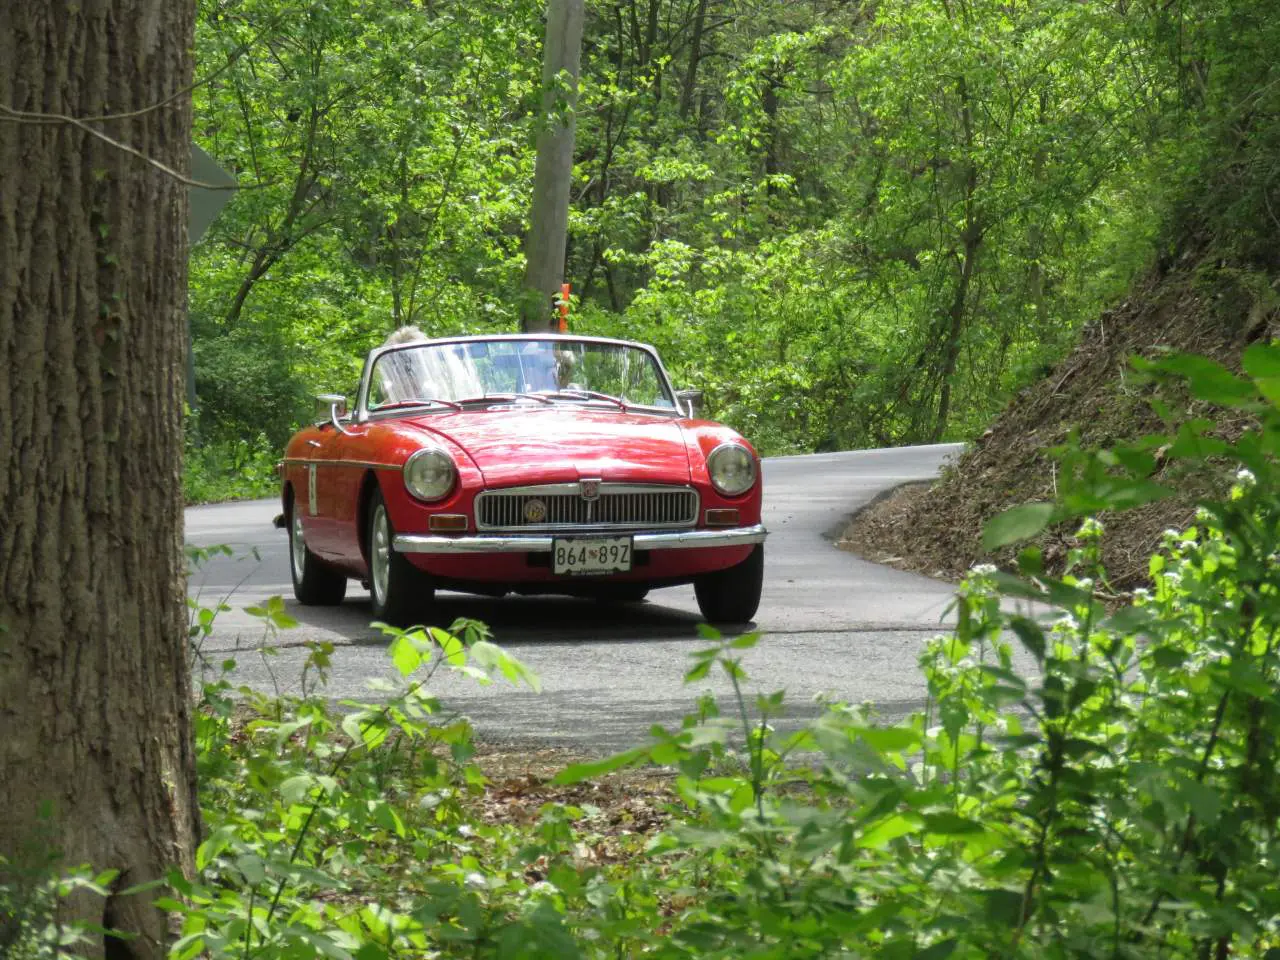 A red car driving down the road in the woods.